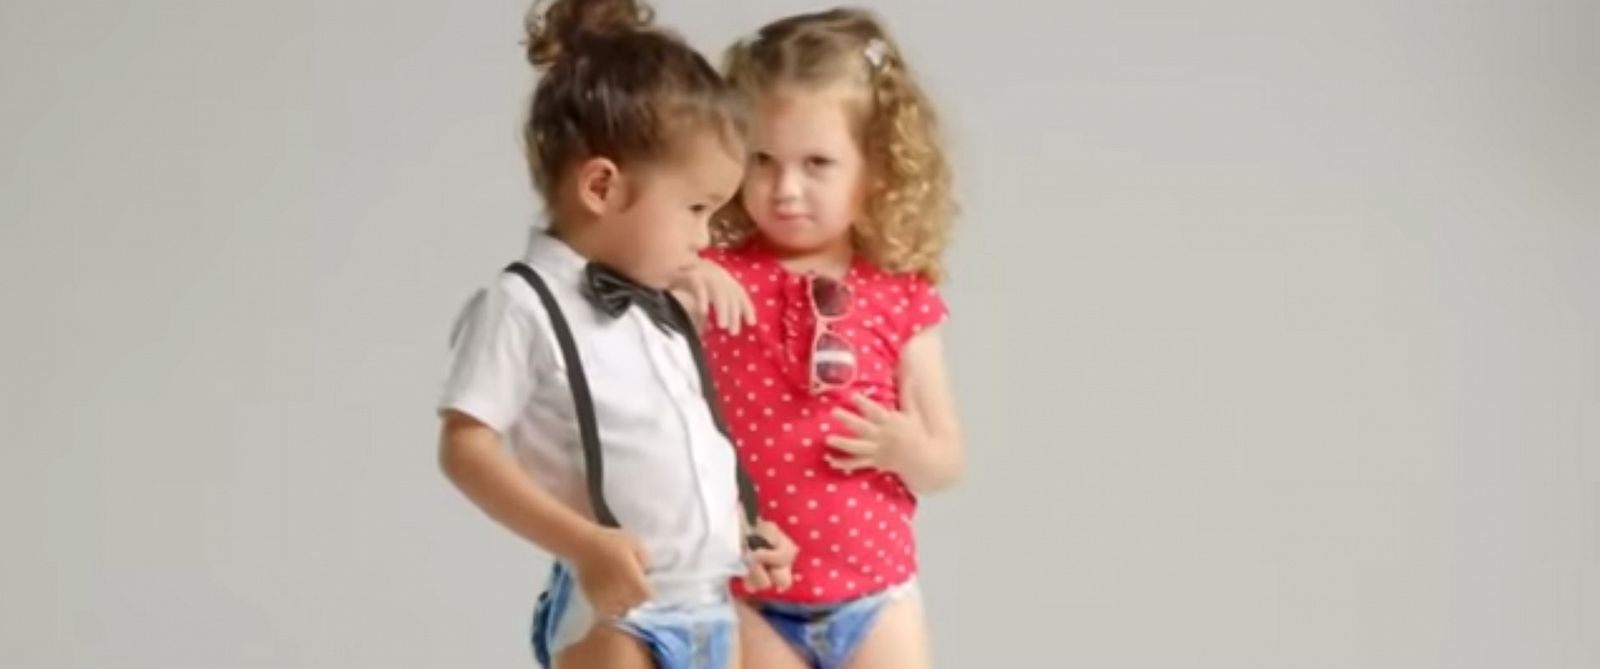 Some Call Huggies Diapers Ad in Israel Sexually Suggestive - ABC News